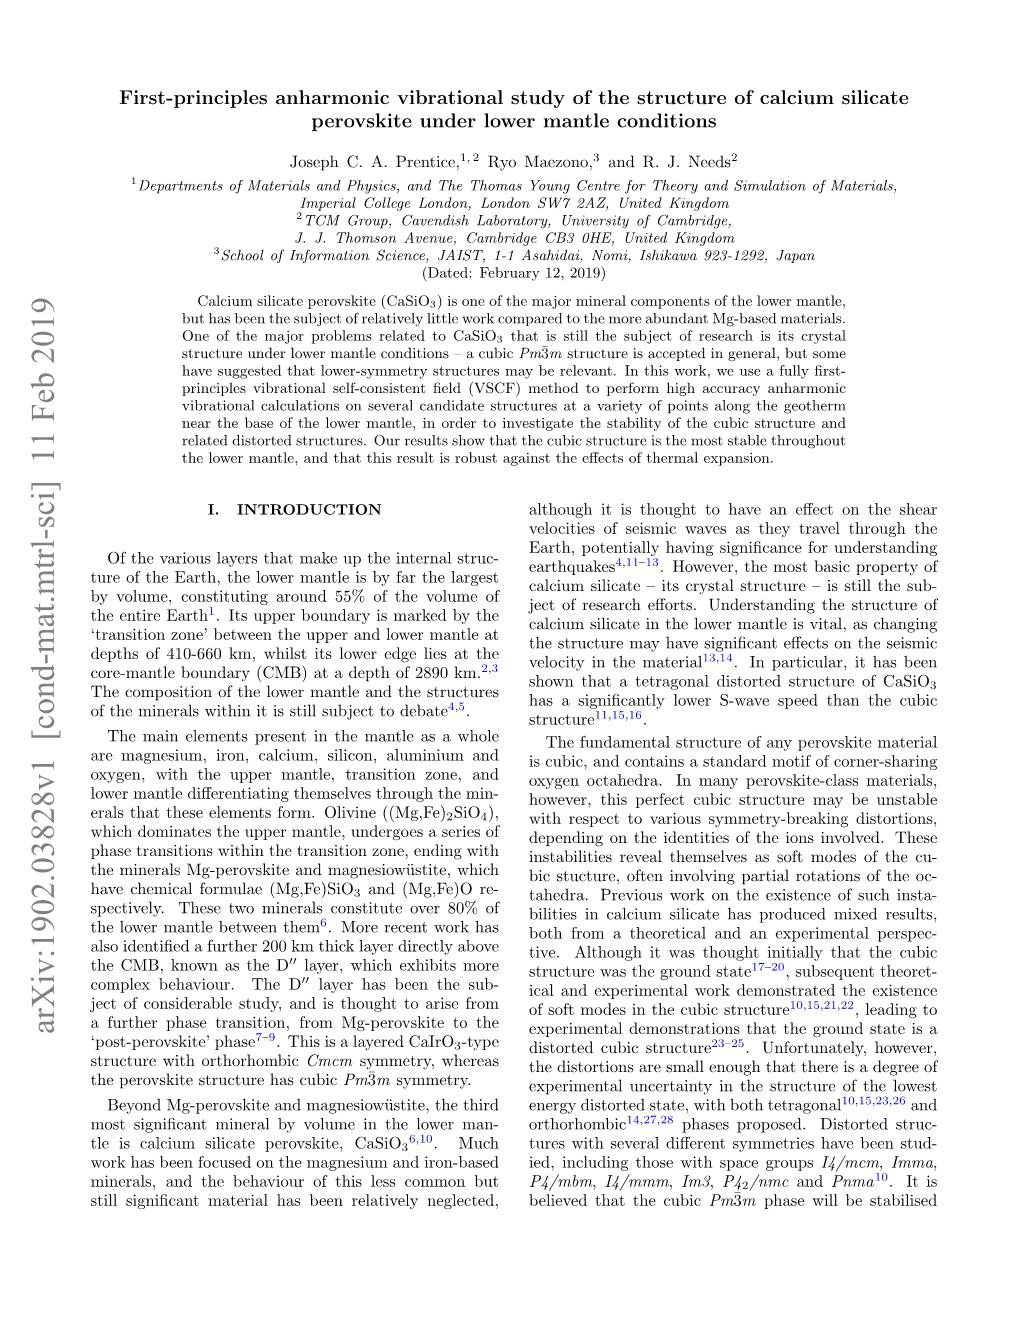 Arxiv:1902.03828V1 [Cond-Mat.Mtrl-Sci] 11 Feb 2019 Experimental Demonstrations That the Ground State Is a 7–9 ‘Post-Perovskite’ Phase